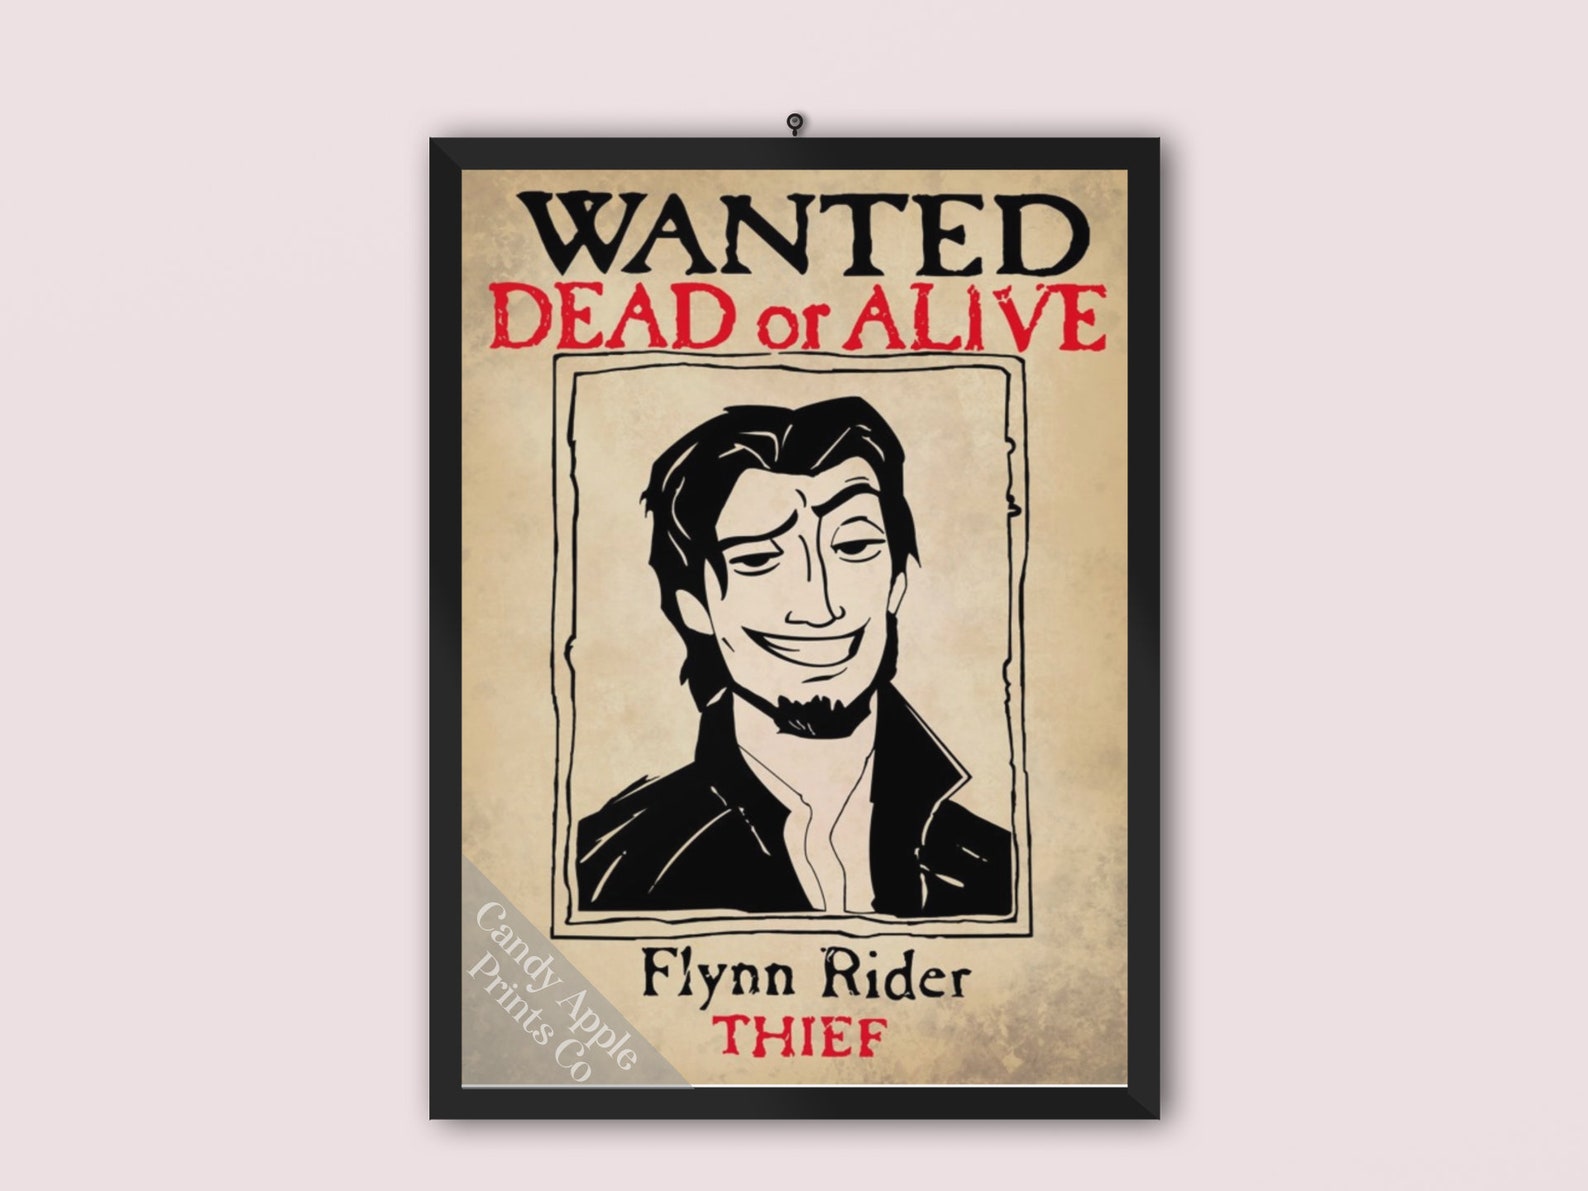 flynn-rider-wanted-poster-printable-customize-and-print